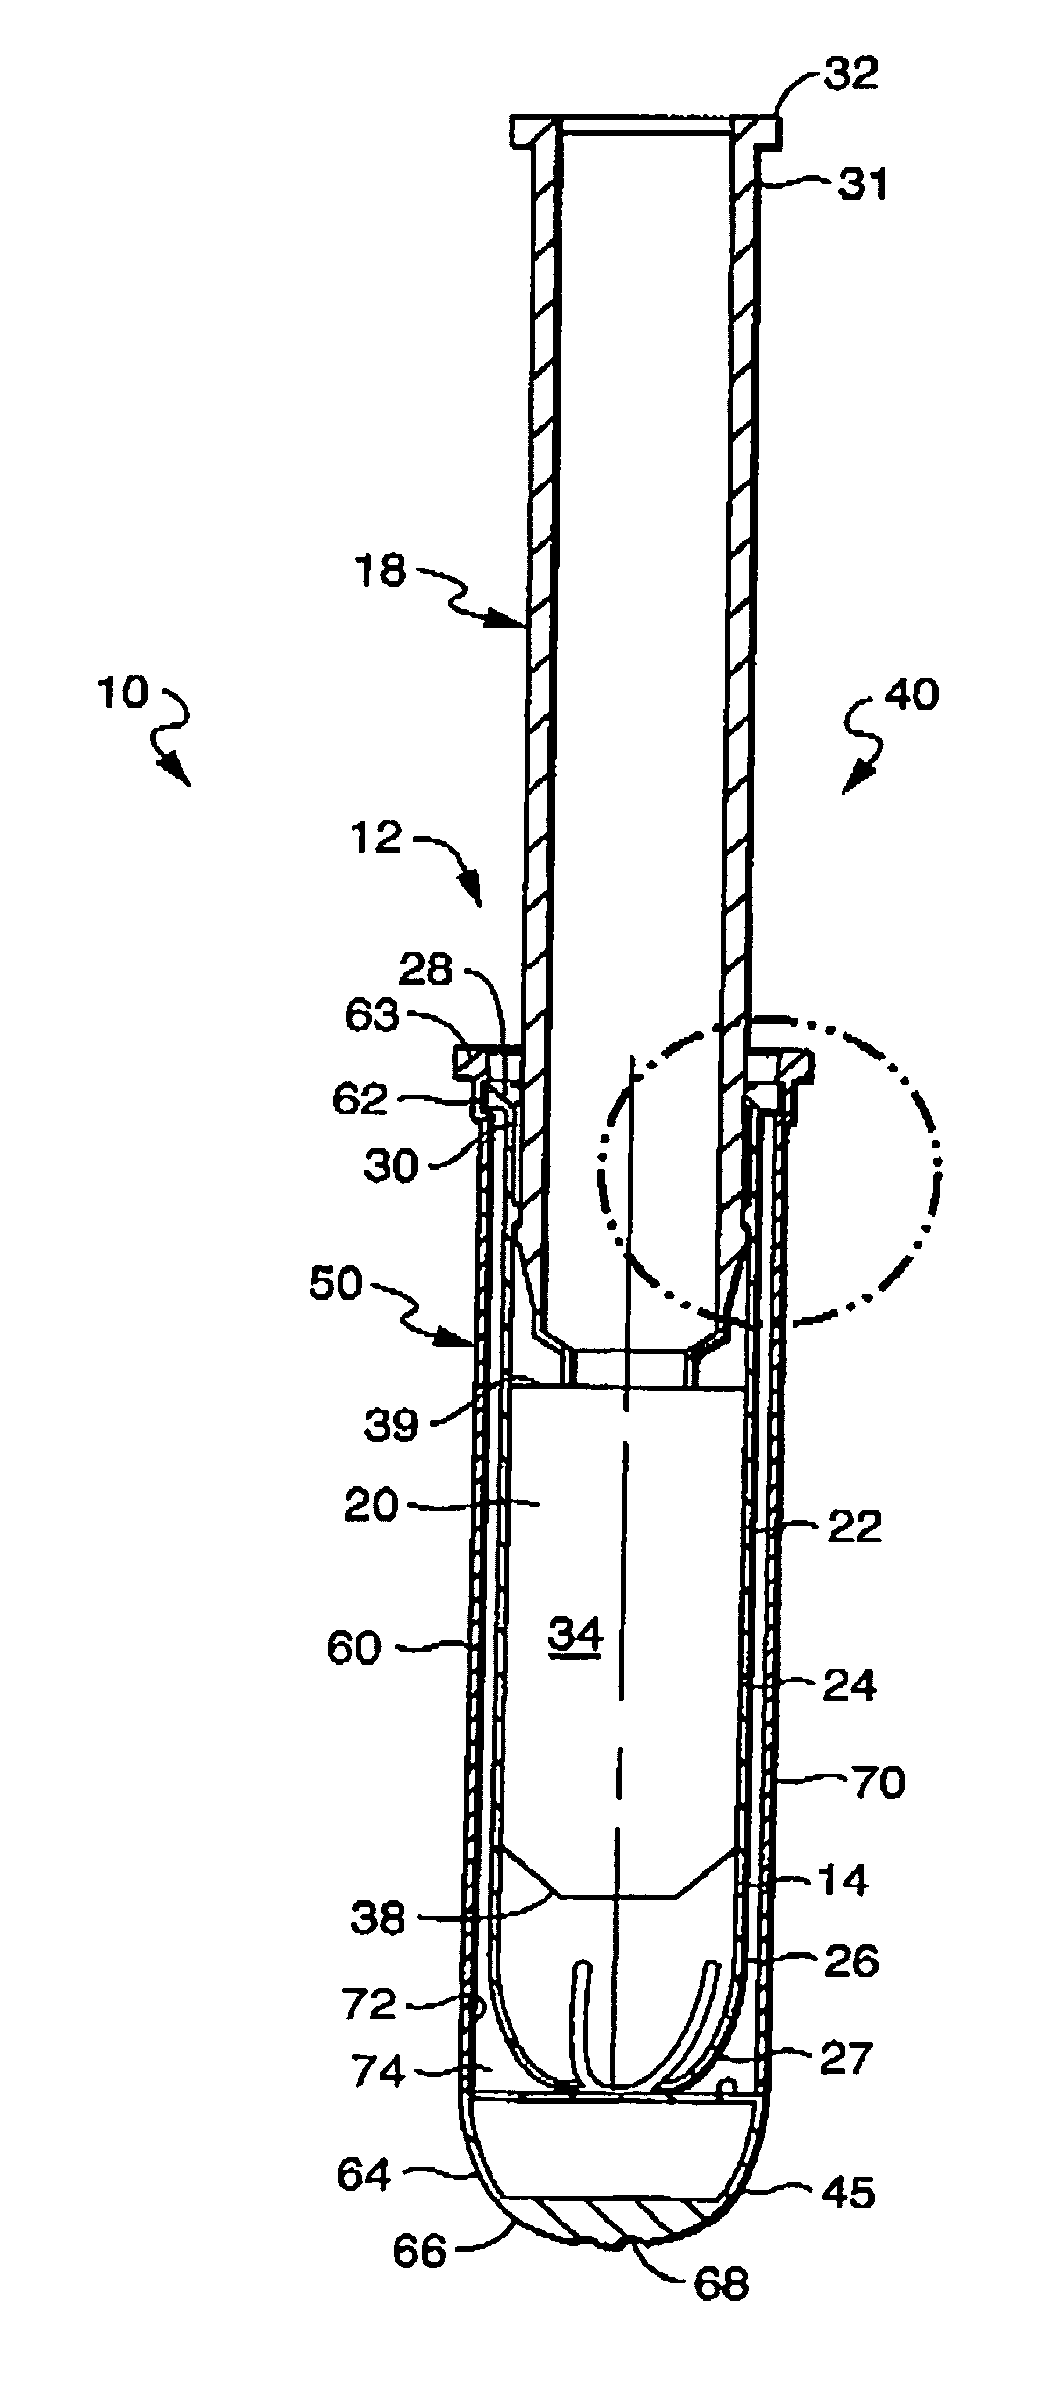 Delivery tube assembly for an applicator